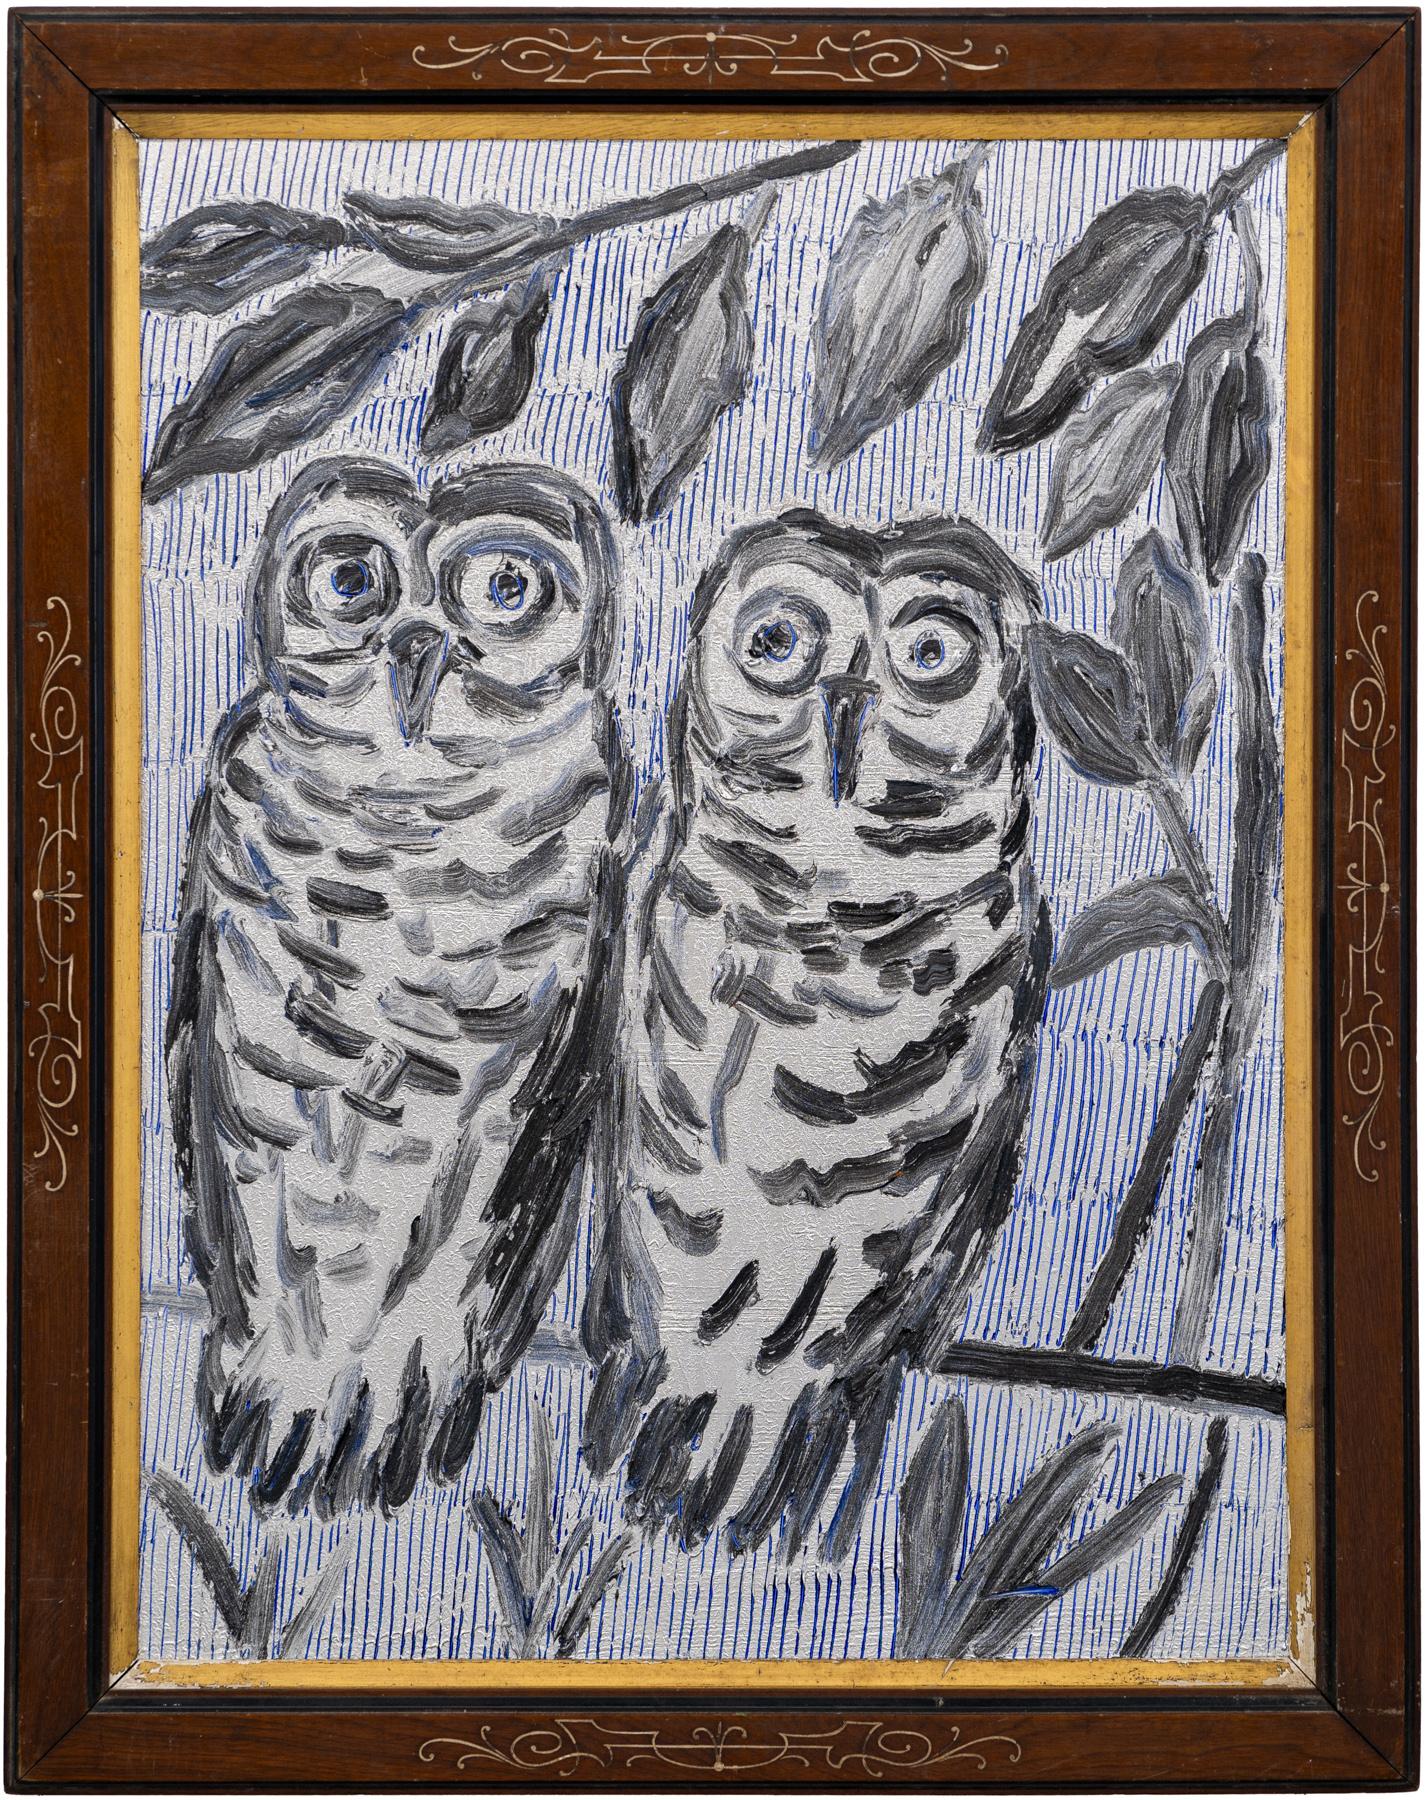 Available at Madelyn Jordon Fine Art. 'Owls New Port' by Hunt Slonem, 2024.  Oil on wood, 35 x 26 in. / Frame: 40 x 32 in. This painting features a charming portrait of two owls. The owls are painted in black and grey on a grey background with a